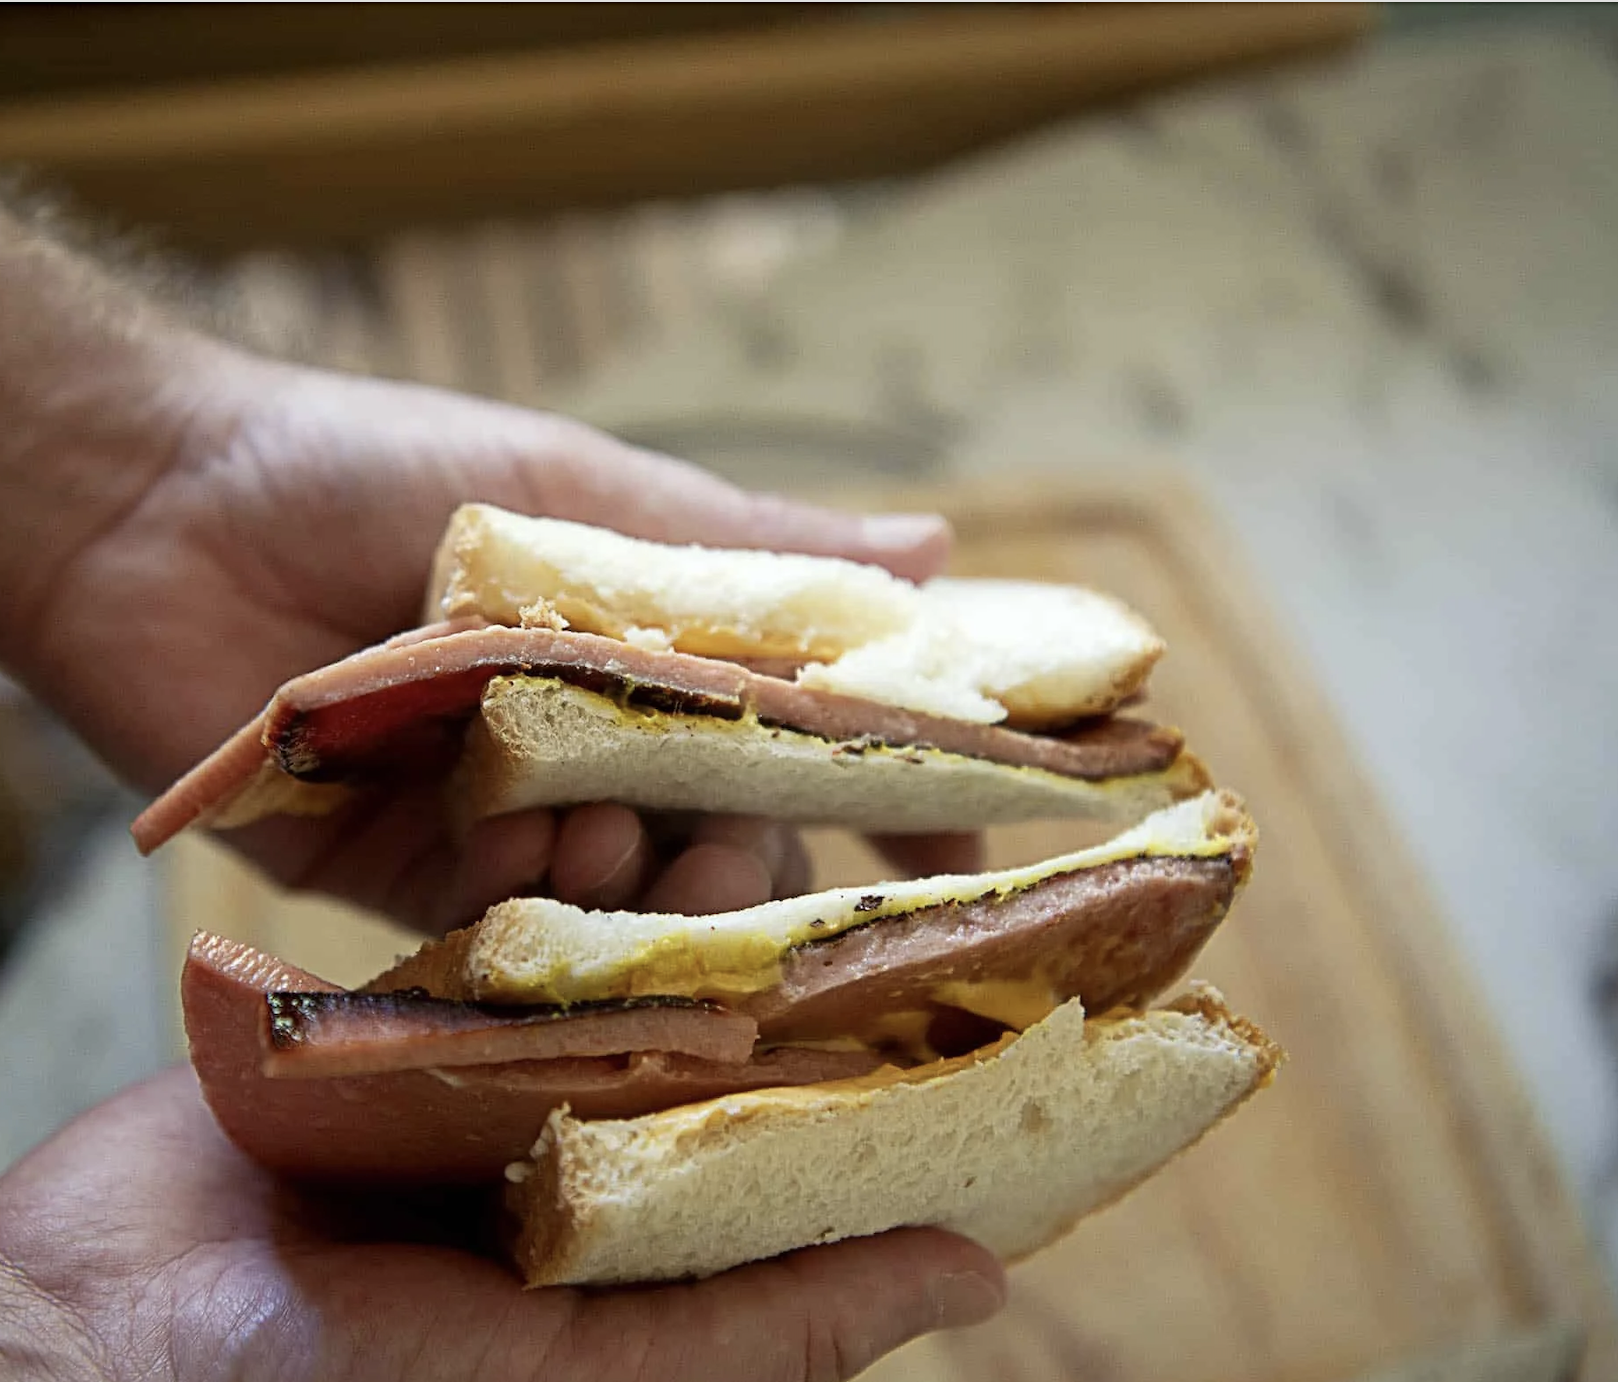 A person holds a sandwich with eggs and ham, cut diagonally, over a wooden board